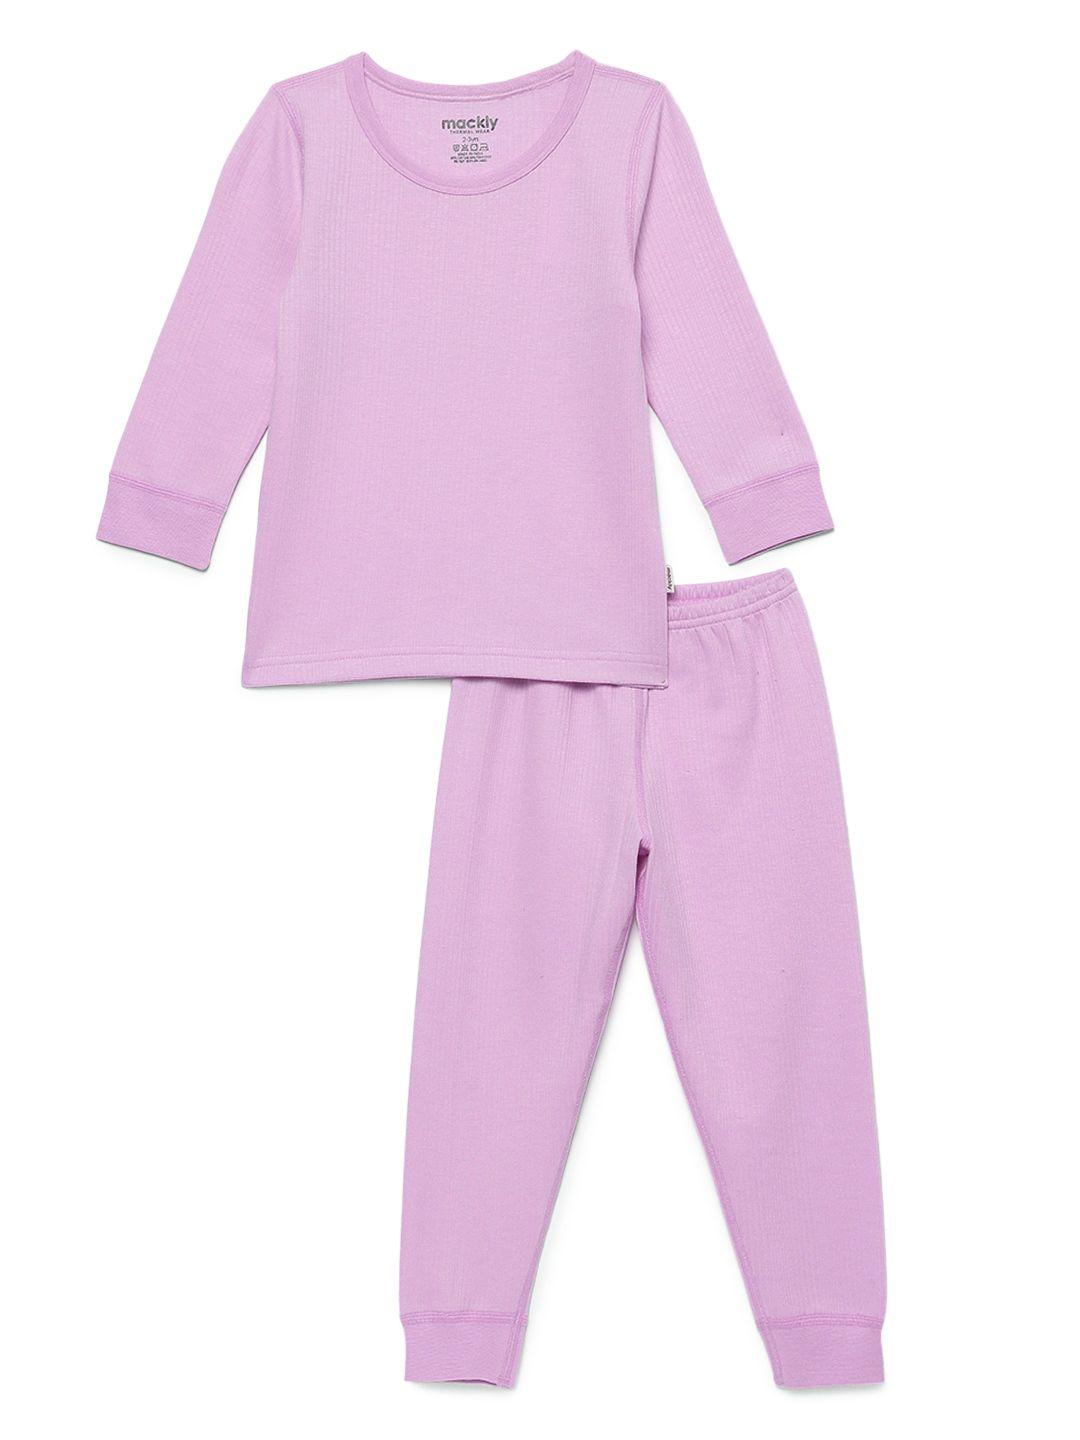 mackly infants purple solid thermal set